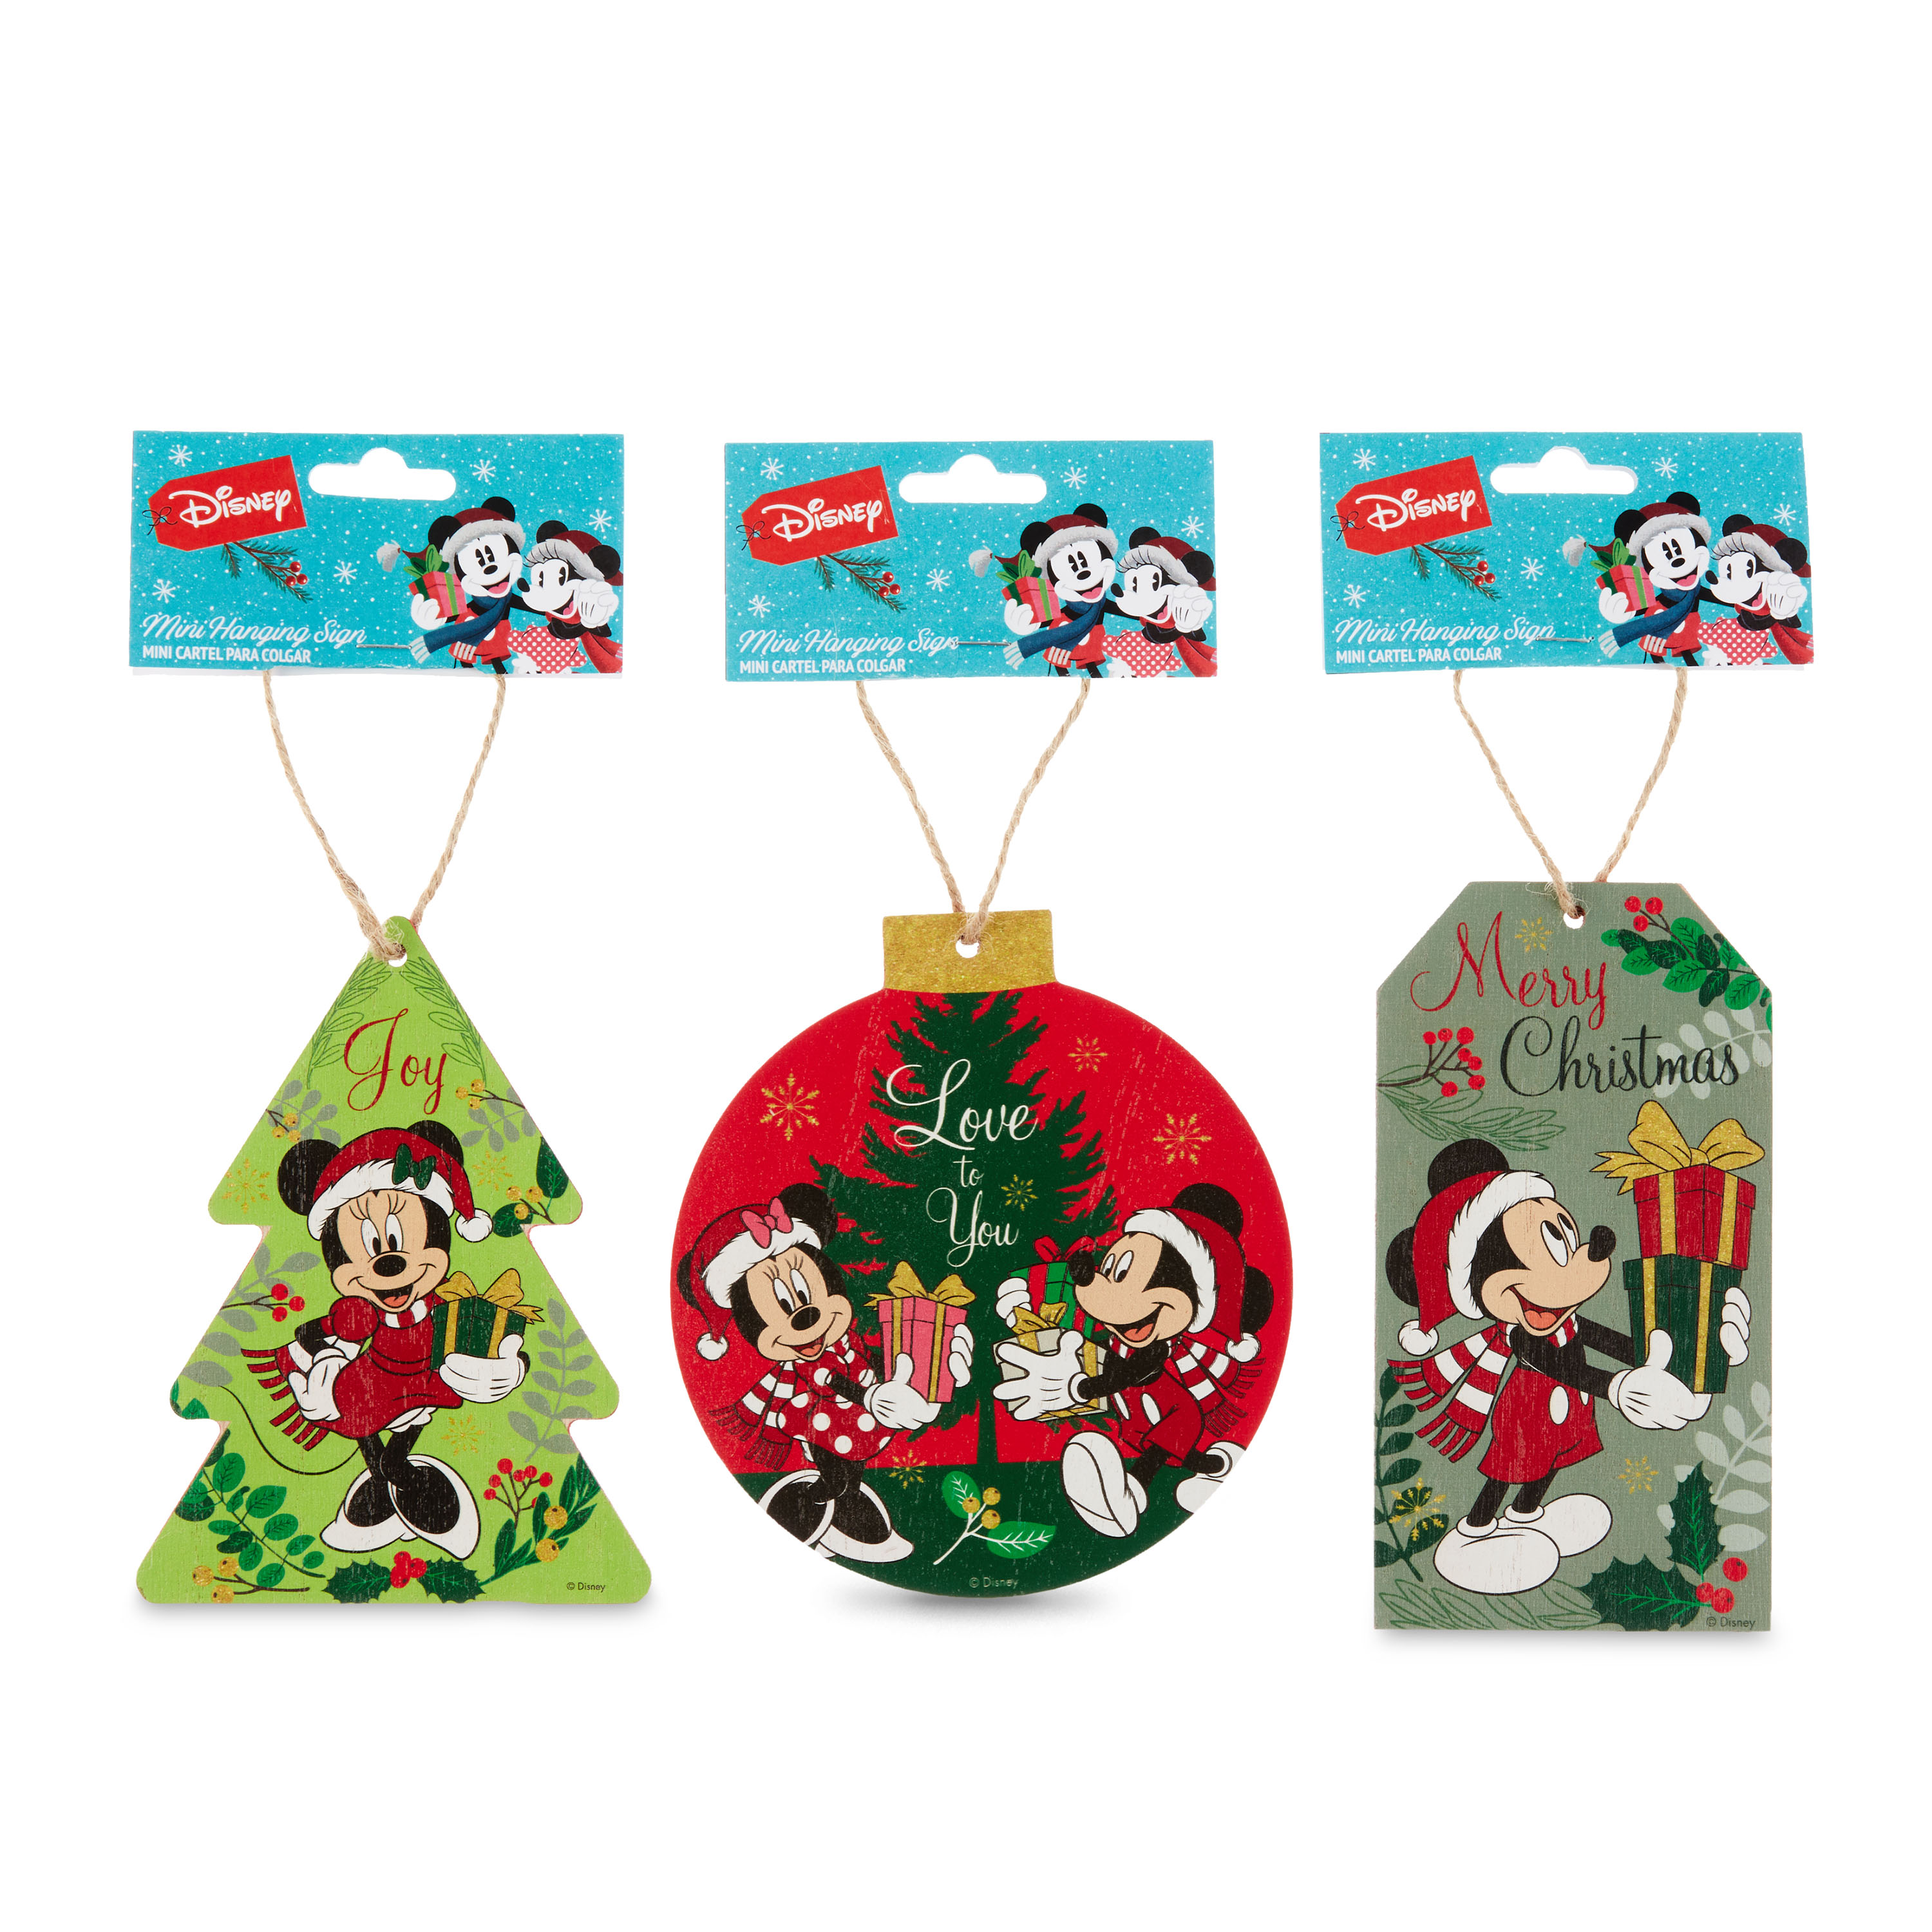 Disney Mickey and Friends Mini Hanging Sign 3 Pack Set, 6 inches Tall, MDF, Multi-Color, Online Only - image 3 of 5